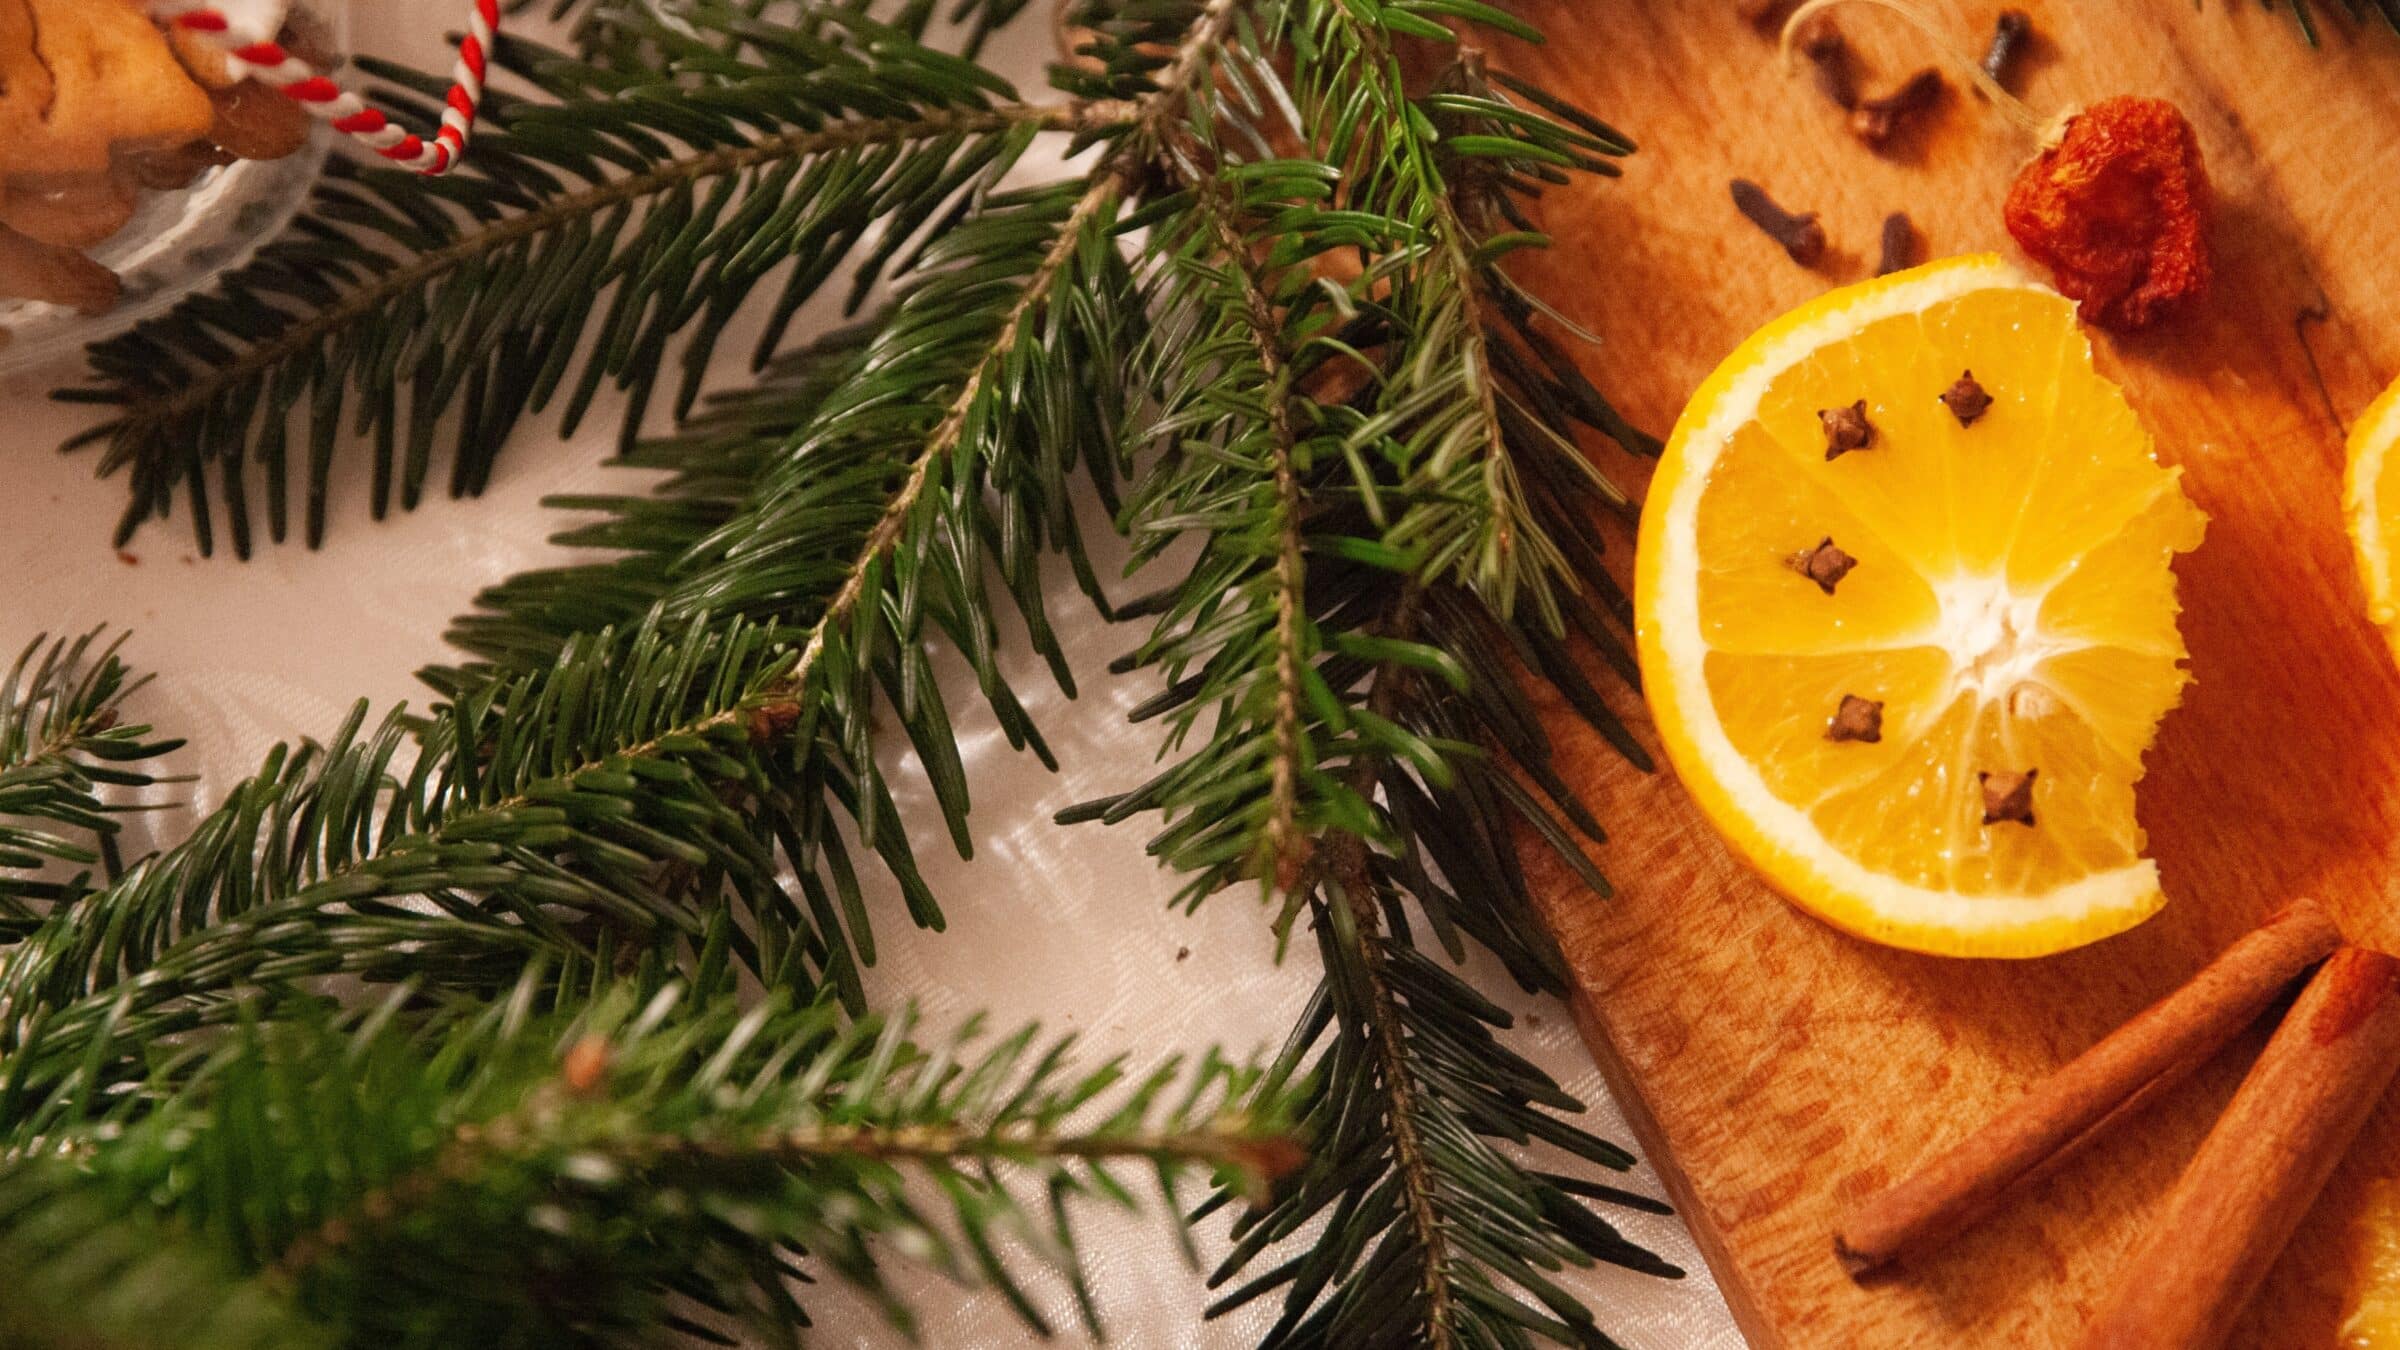 Orange slices, cloves, cinnamon sticks, and evergreen branches artfully laid out on a wooden cutting board